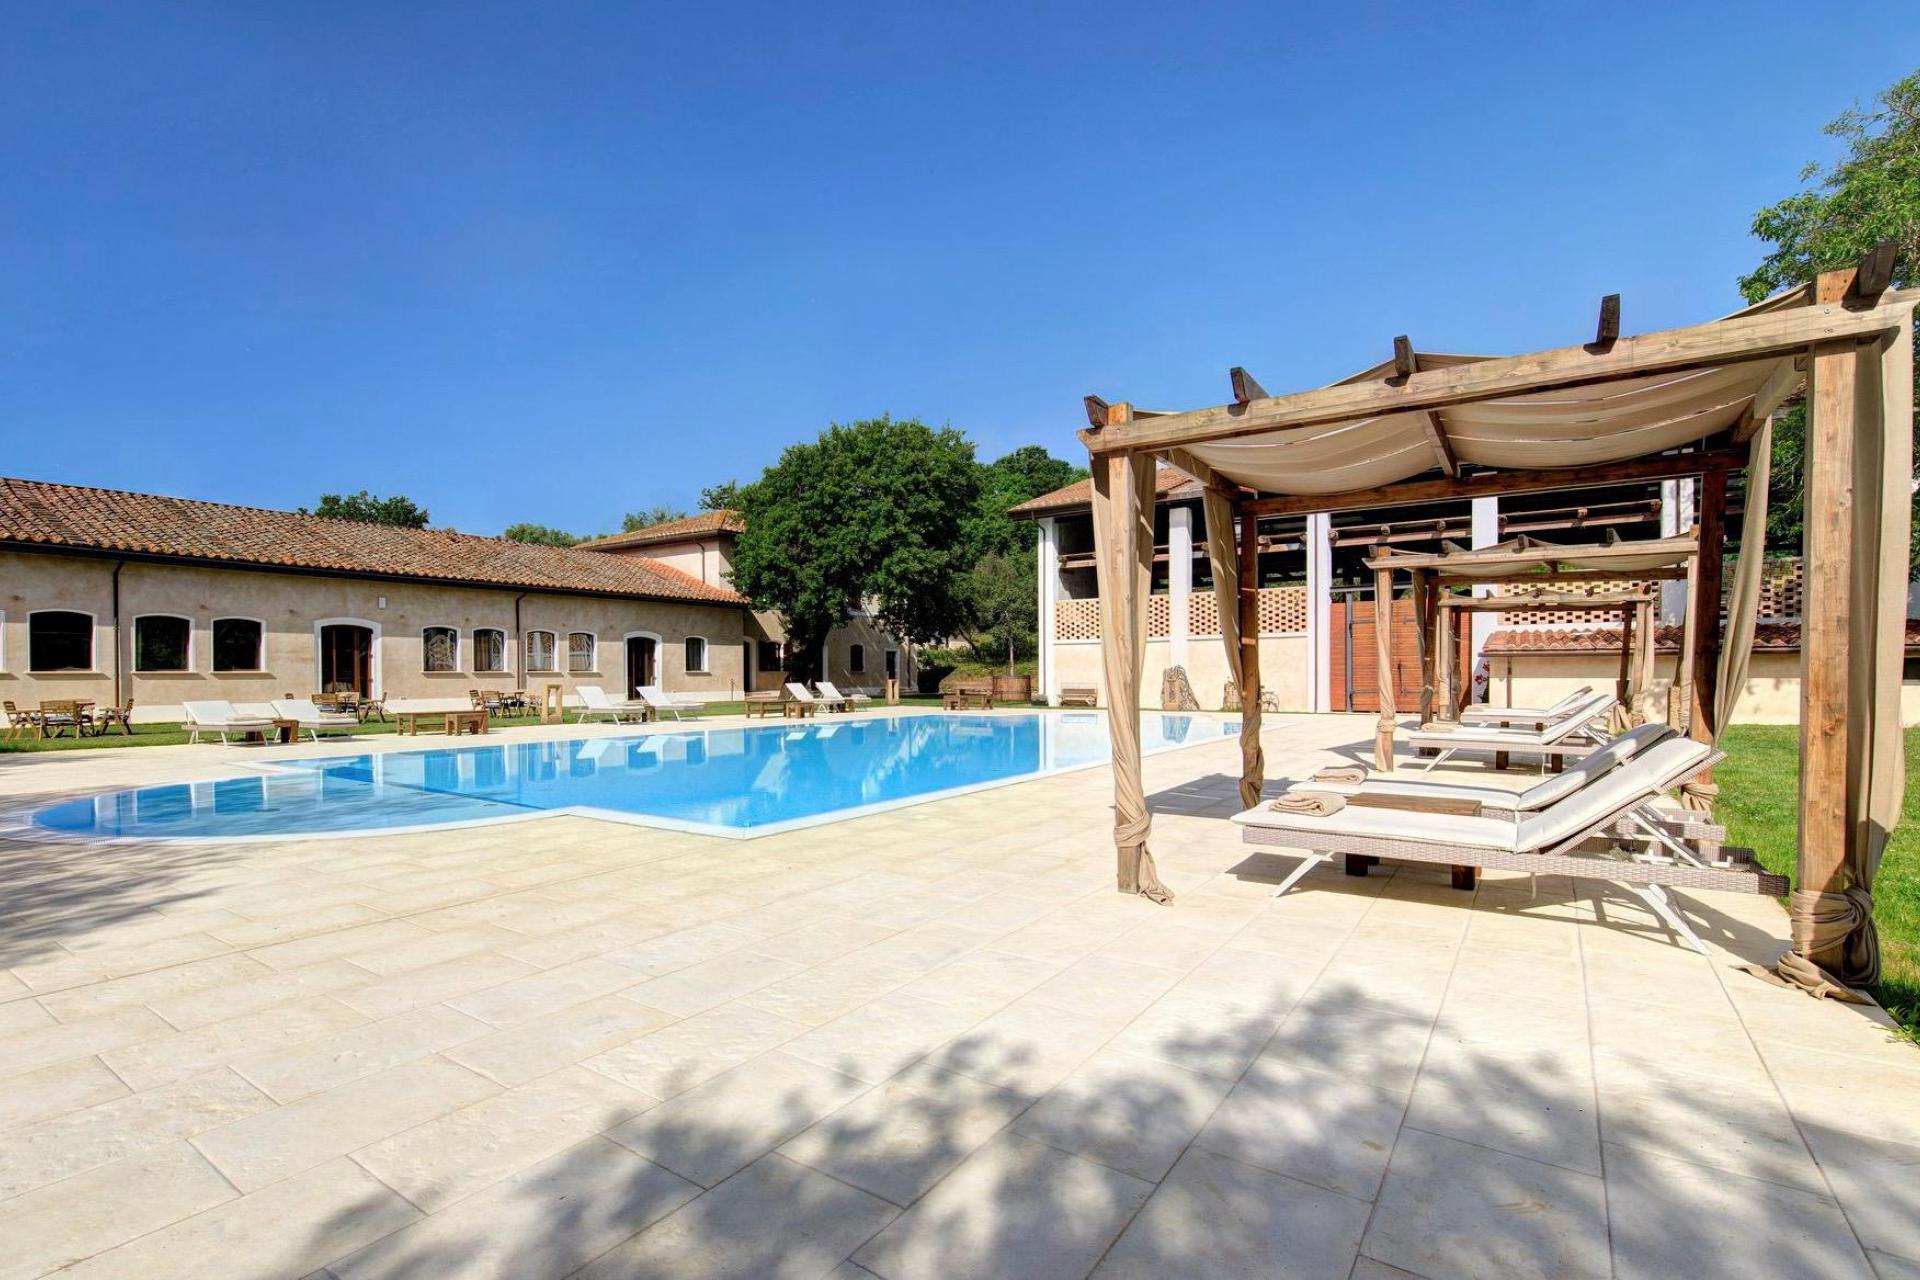 Luxury agriturismo near Rome with restaurant and swimming pool